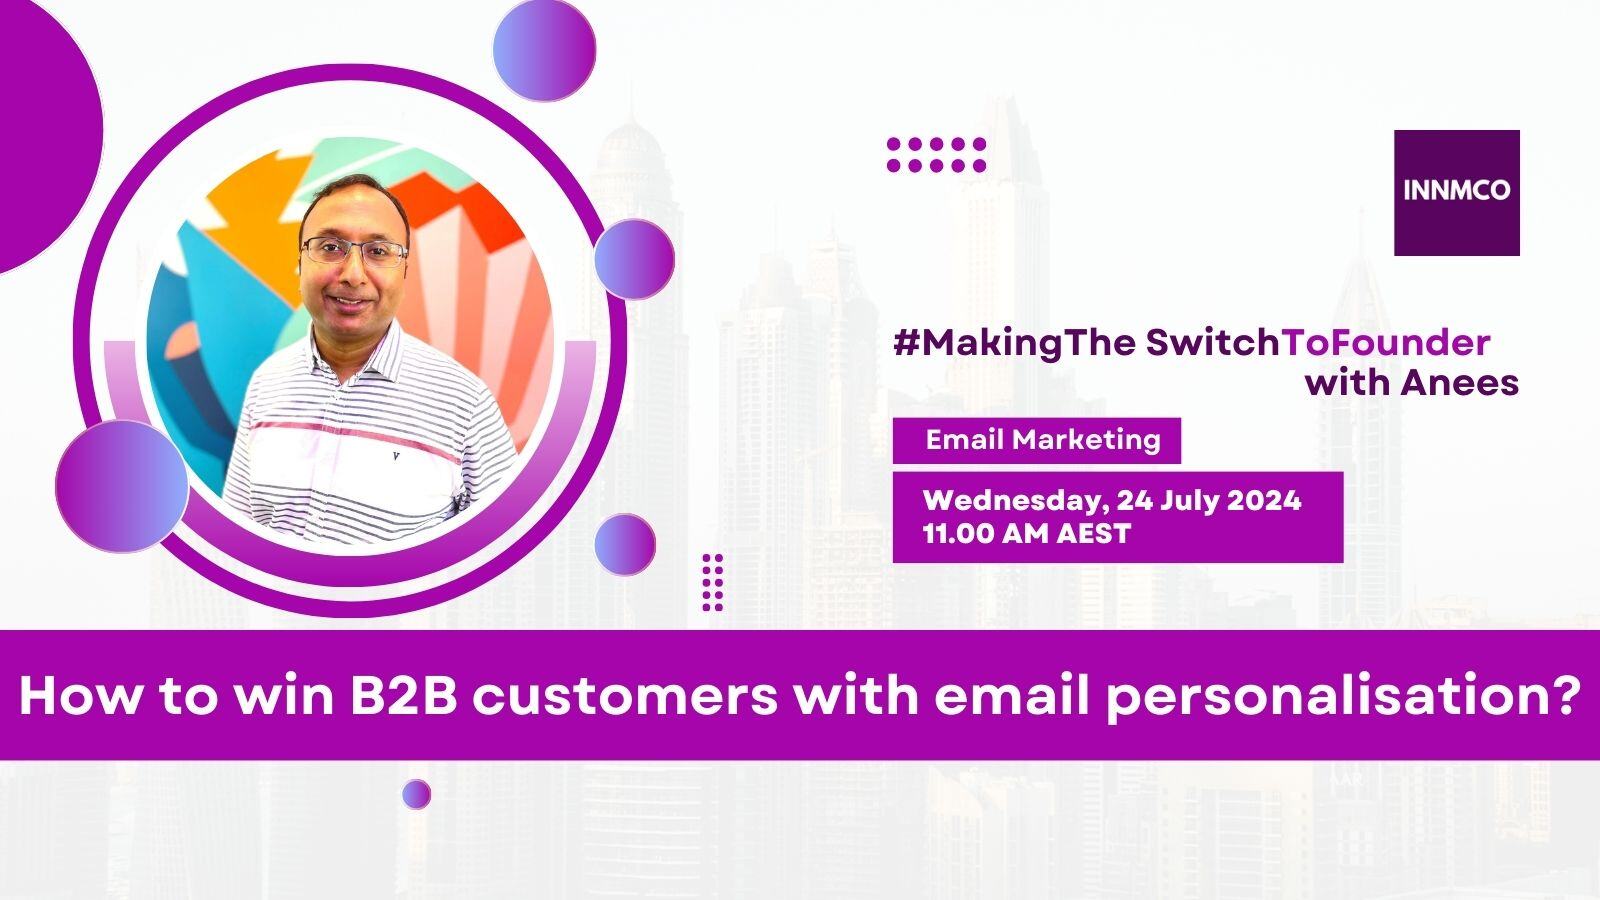 INNMCO Webinar - Email Marketing Banner - July 2024 - How to win B2B customers with email personalisation